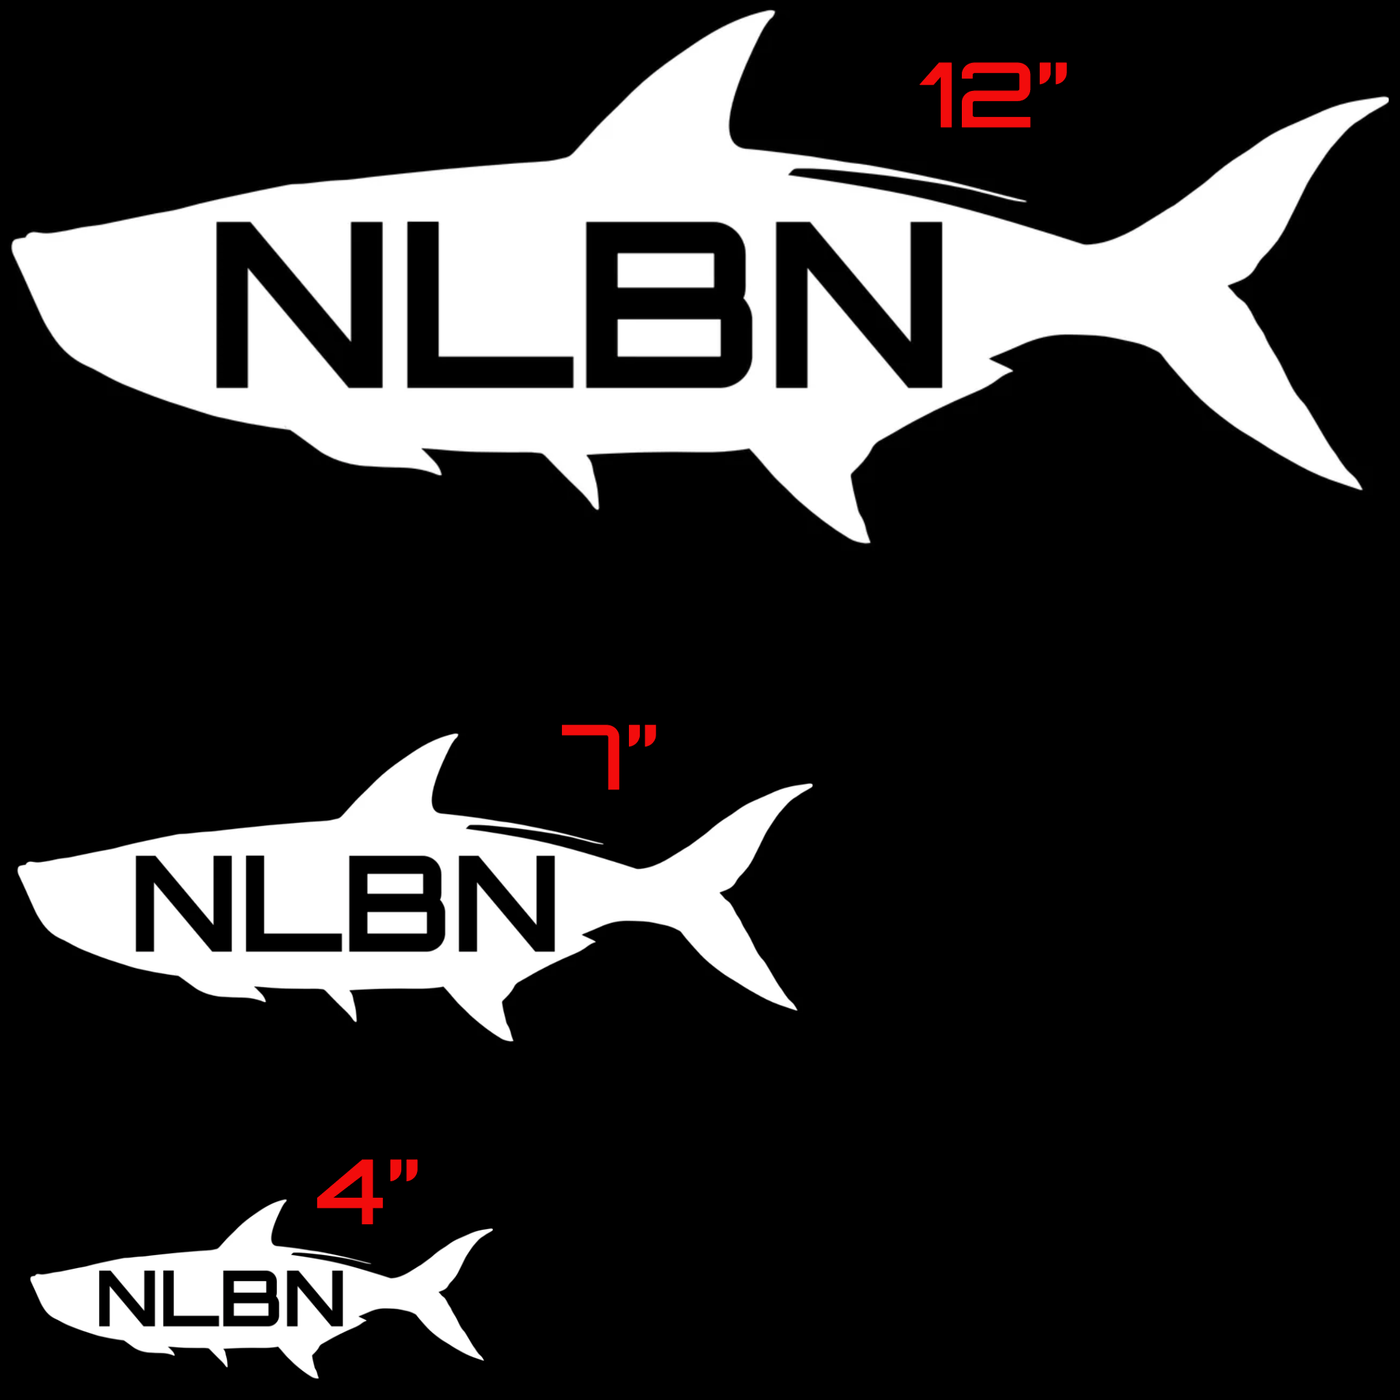 Premium fishing 30 lber NLBN Snook Decals - No Live Bait Needed $3.99